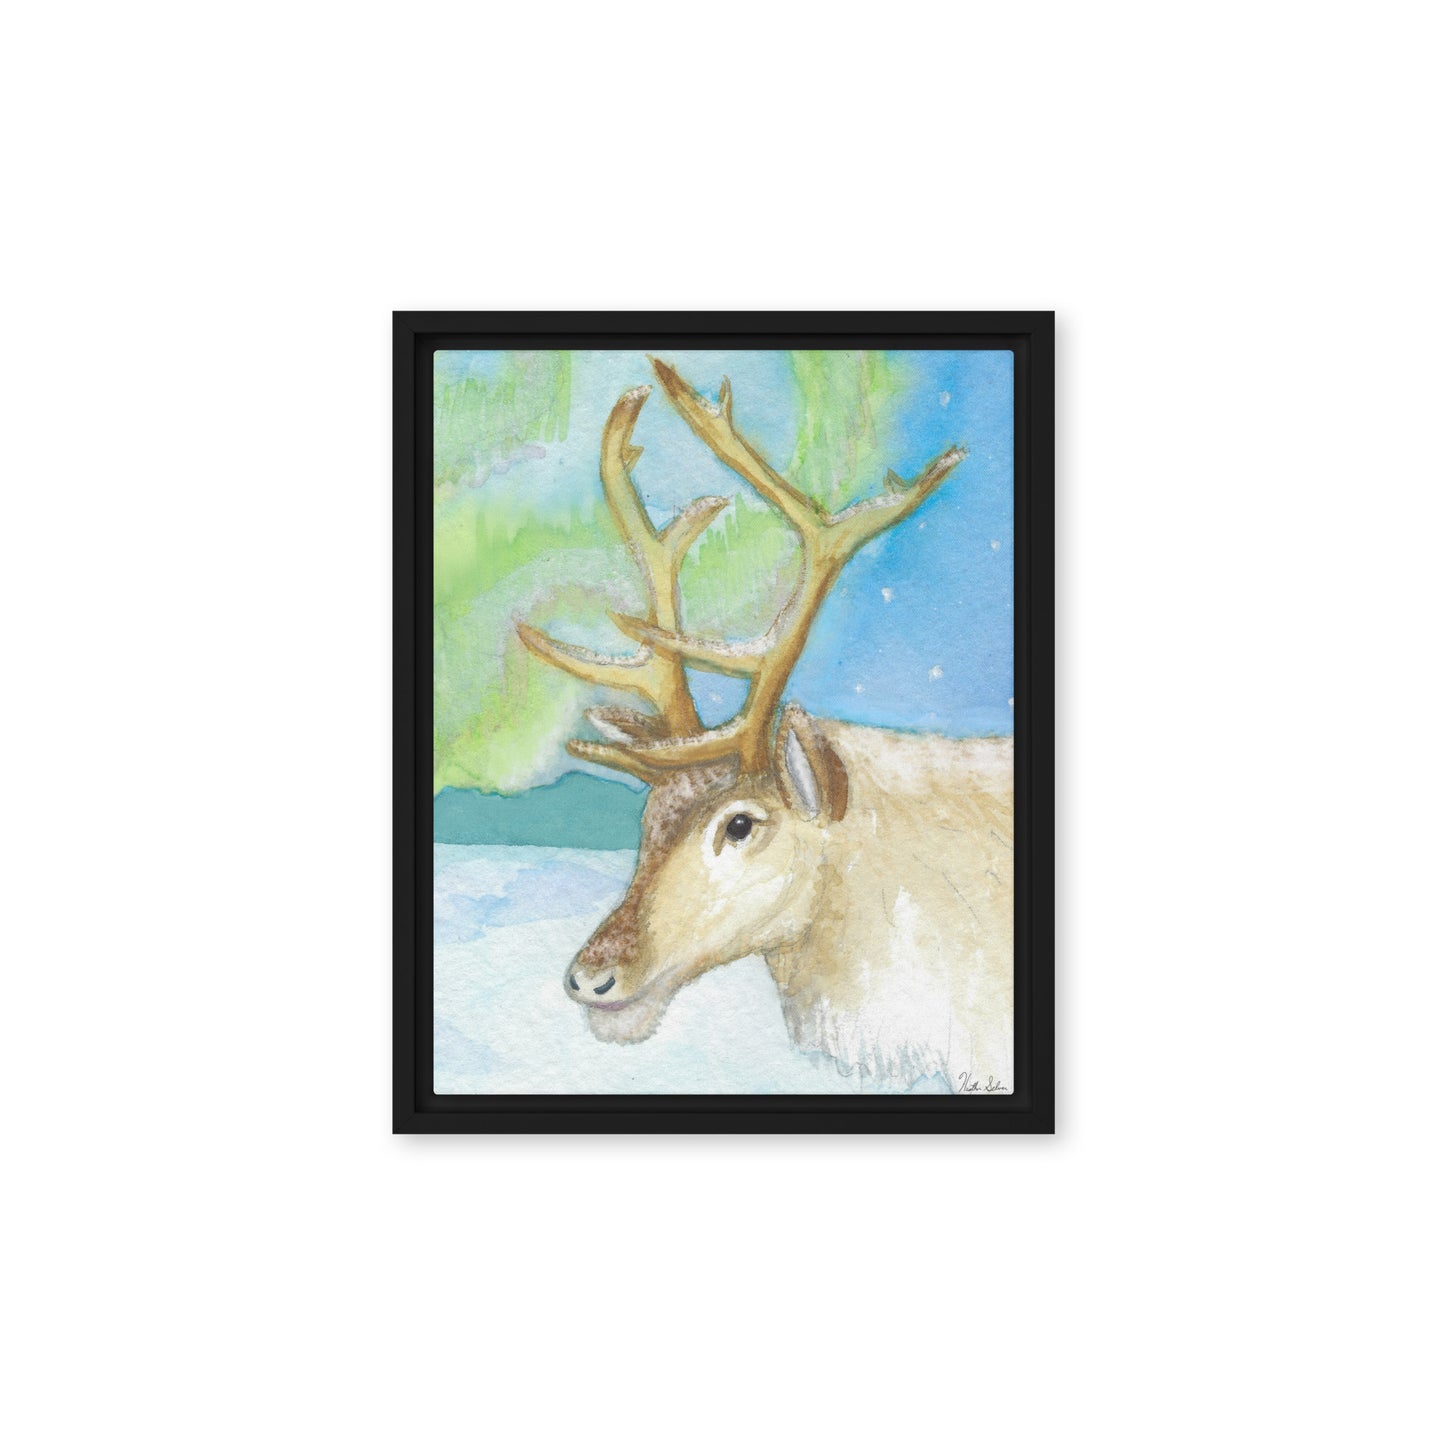 11 by 14 inch framed canvas art print of Heather Silver's Northern Lights Reindeer.  Canvas print mounted in a black pine frame. Hanging hardware included.